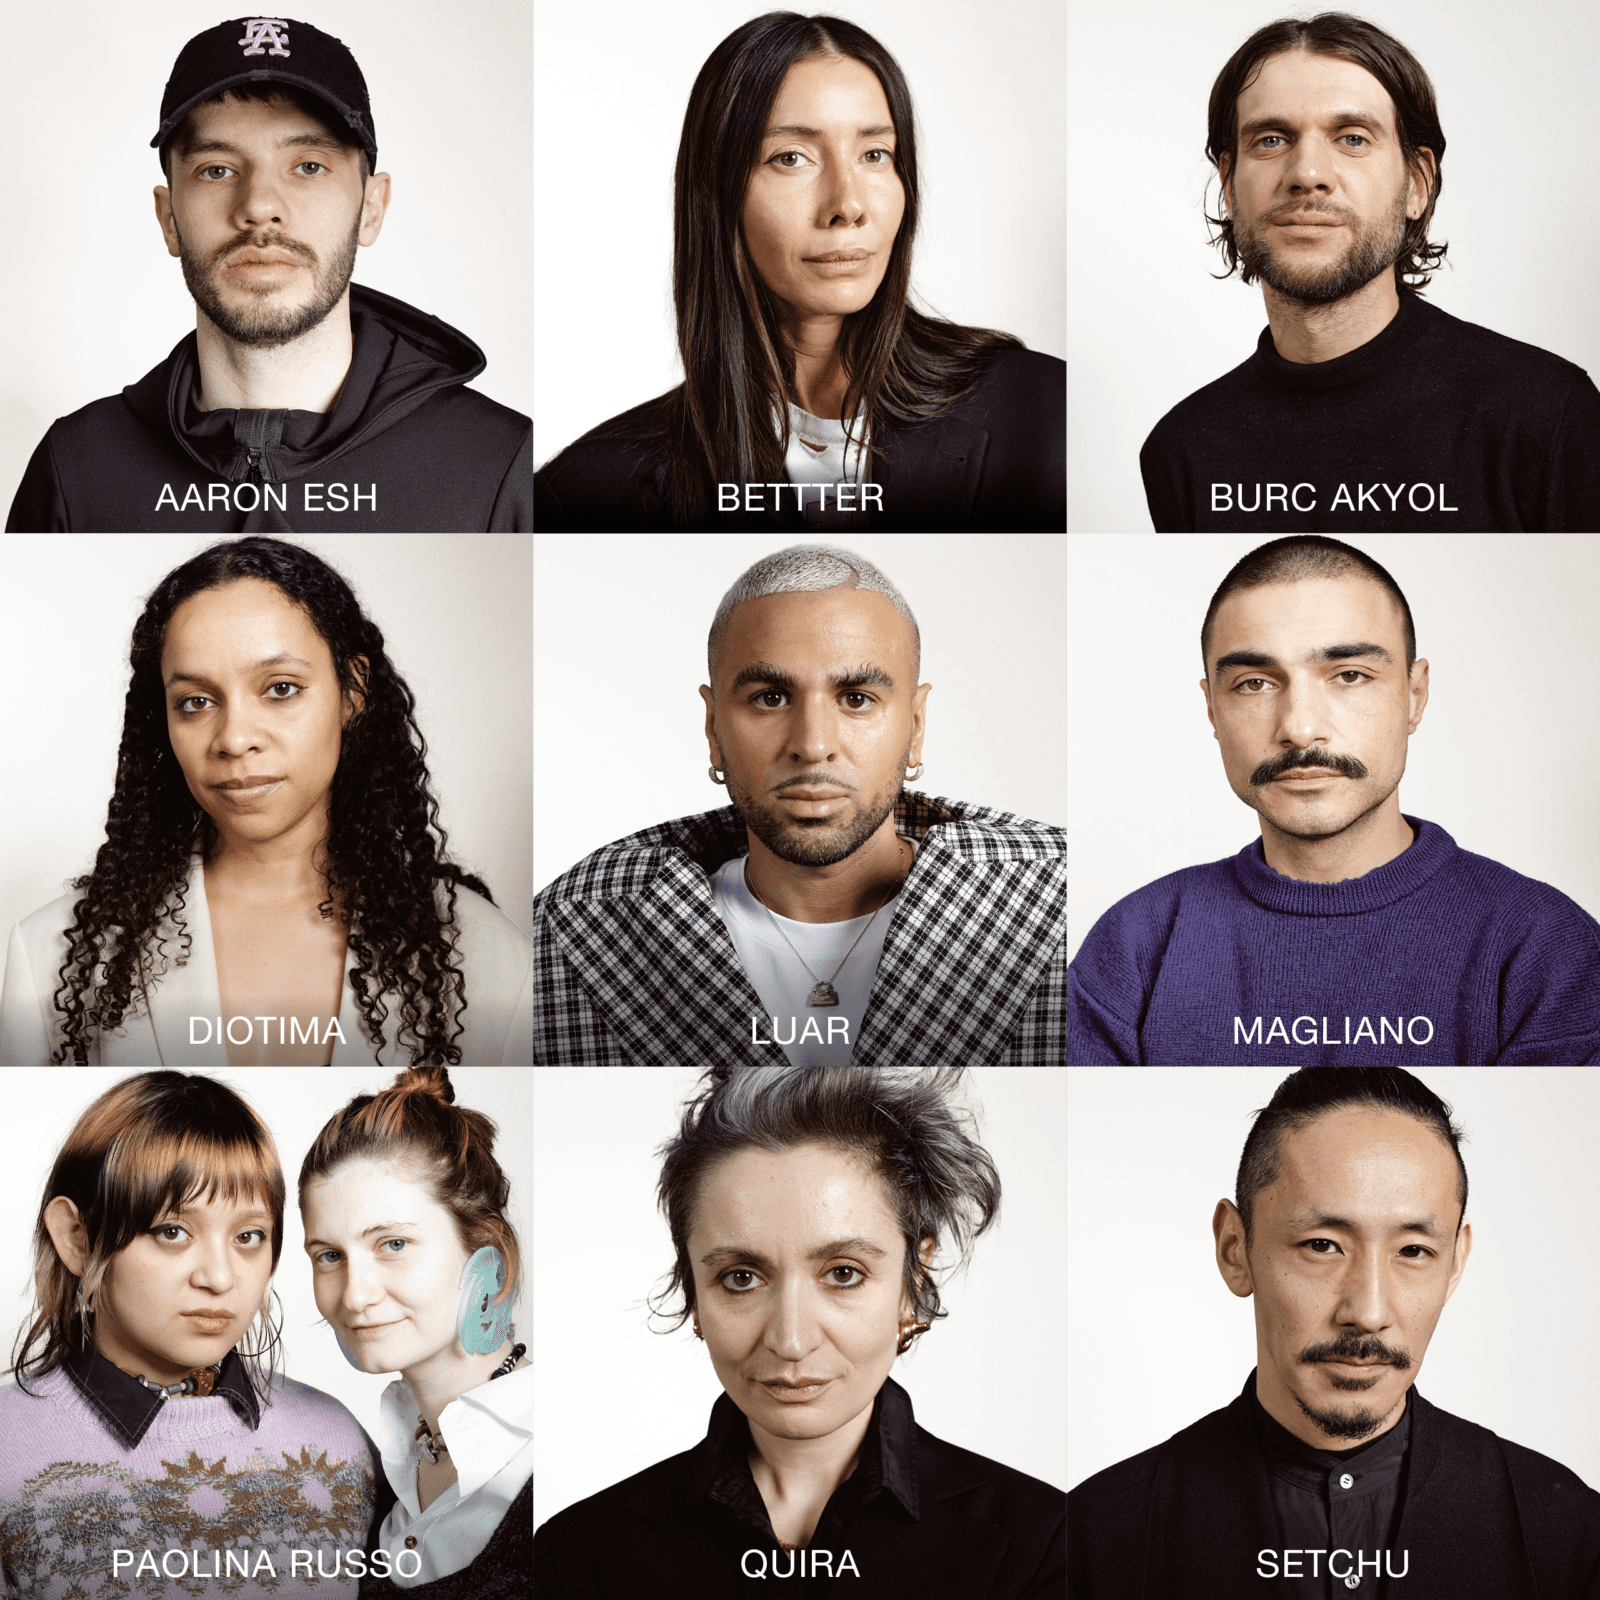 Meet the 20 Semi-Finalists Competing for This Year's LVMH Prize